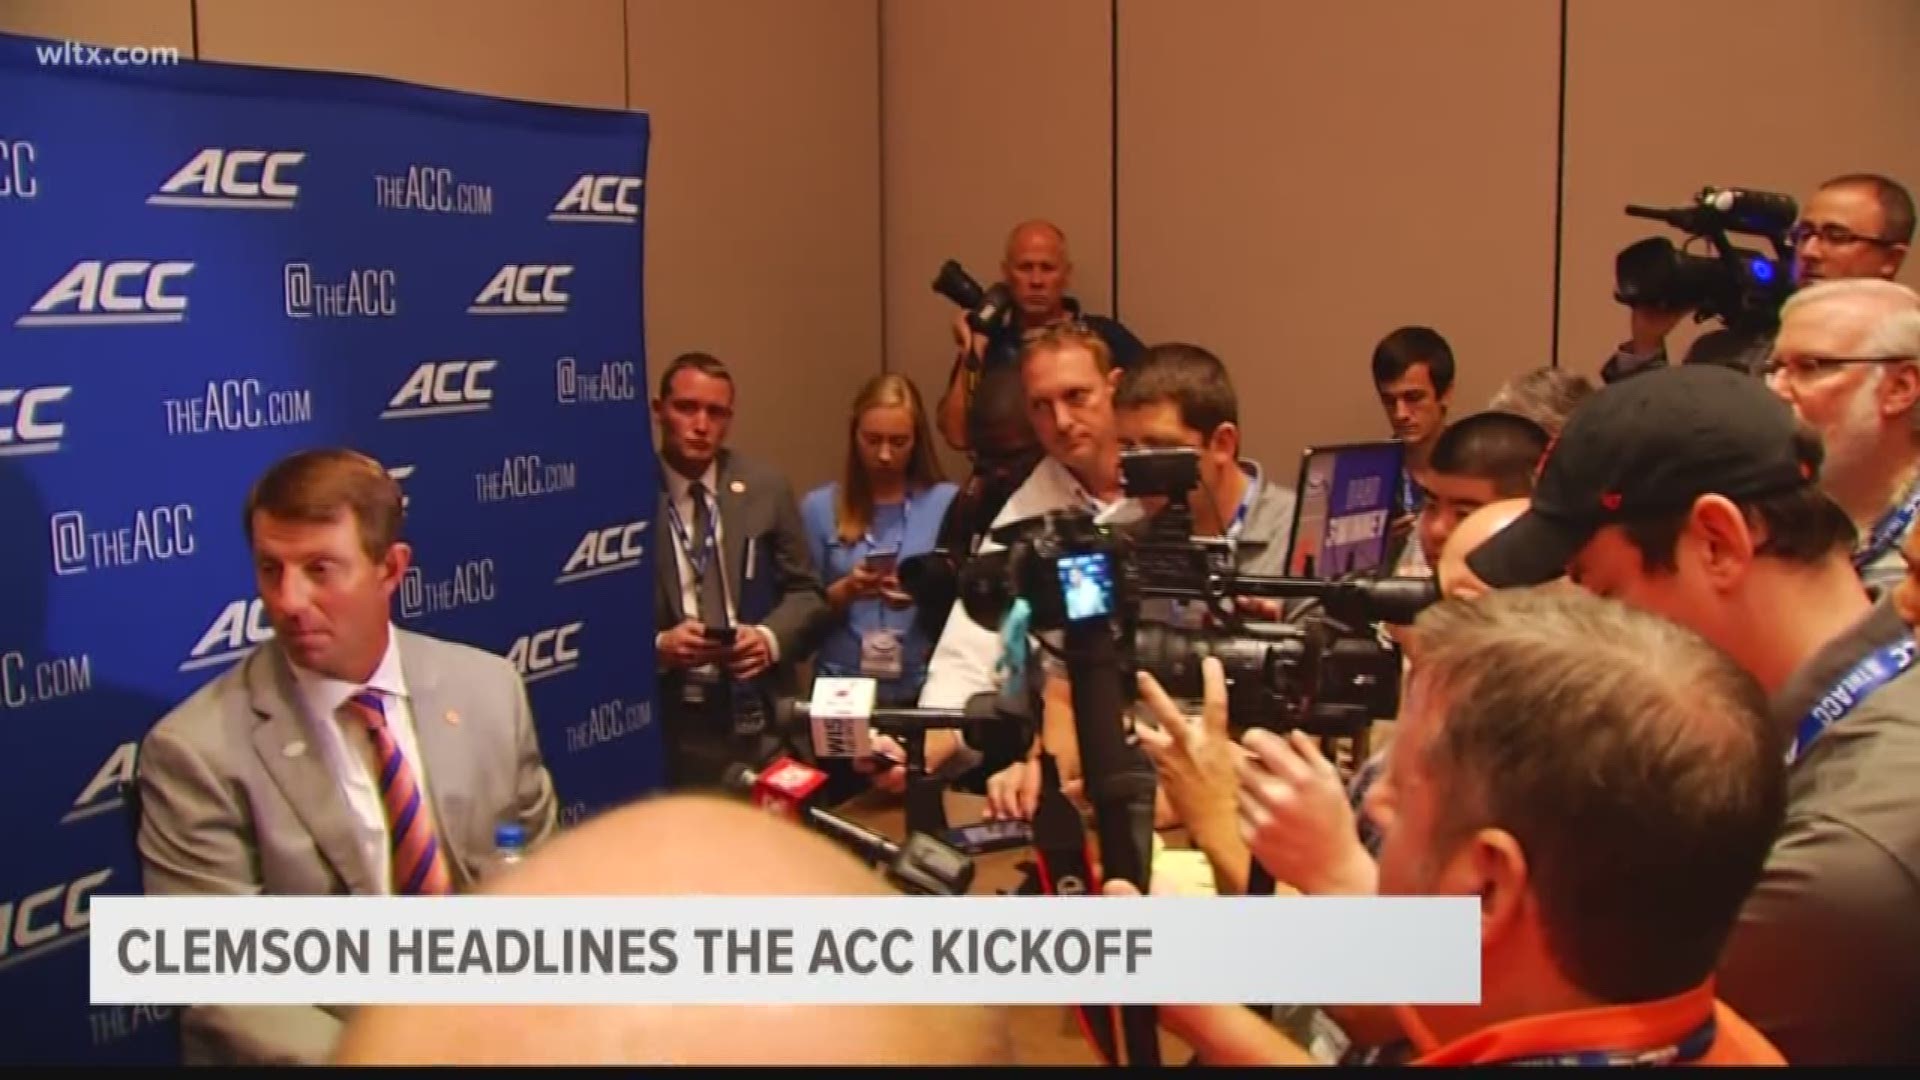 Until someone knocks them off their perch, Clemson is on top of the ACC football mountain. The Tigers drew plenty of attention at the league's preseason media event in Charlotte